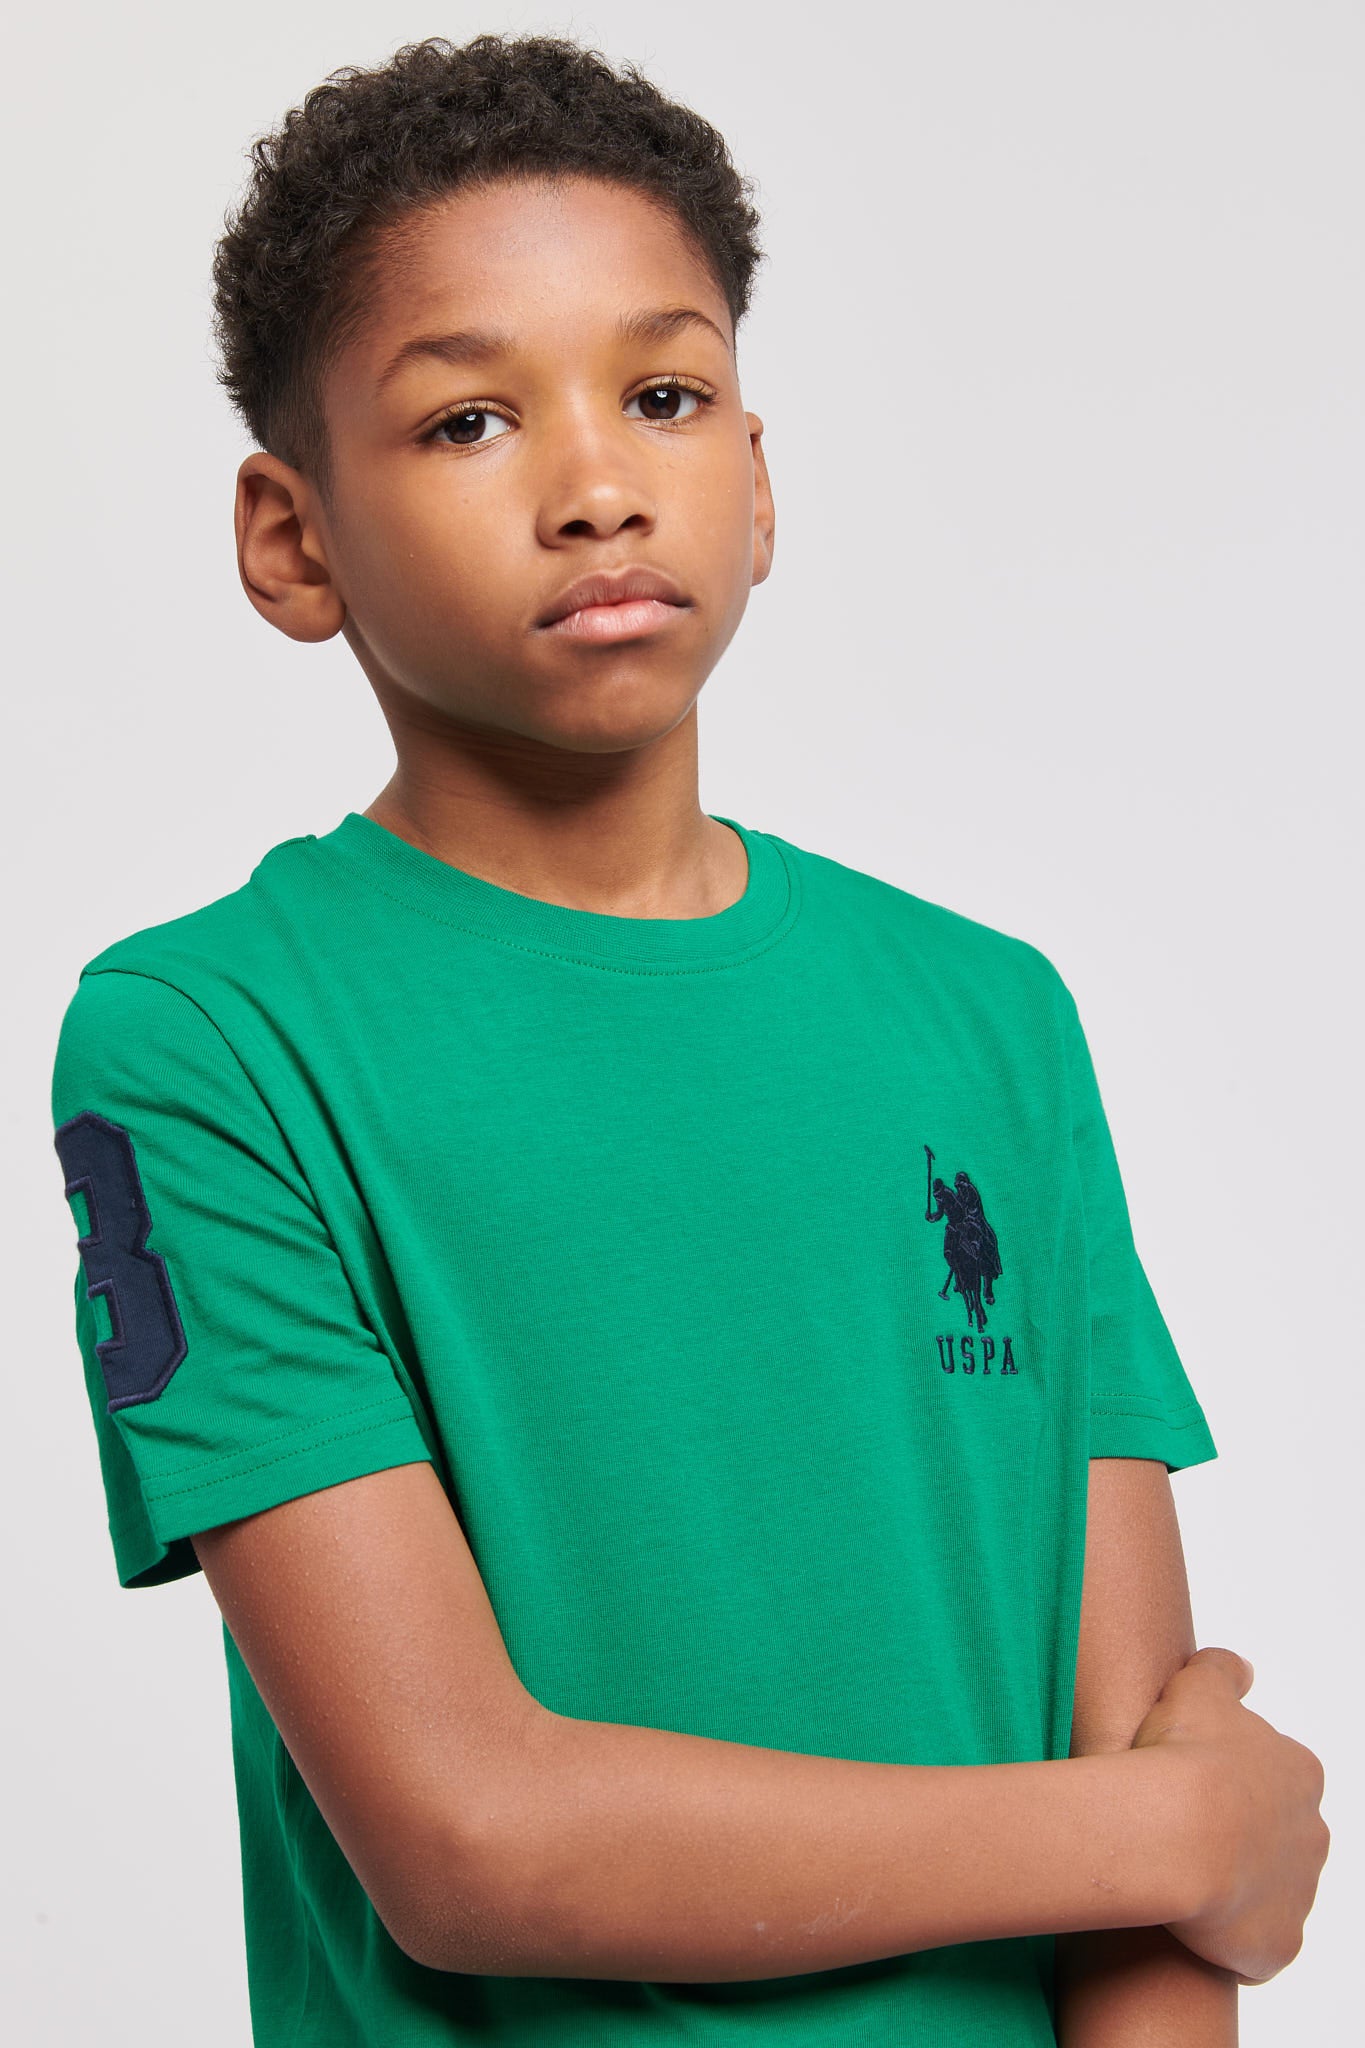 Boys Player 3 T-Shirt in Lush Meadow